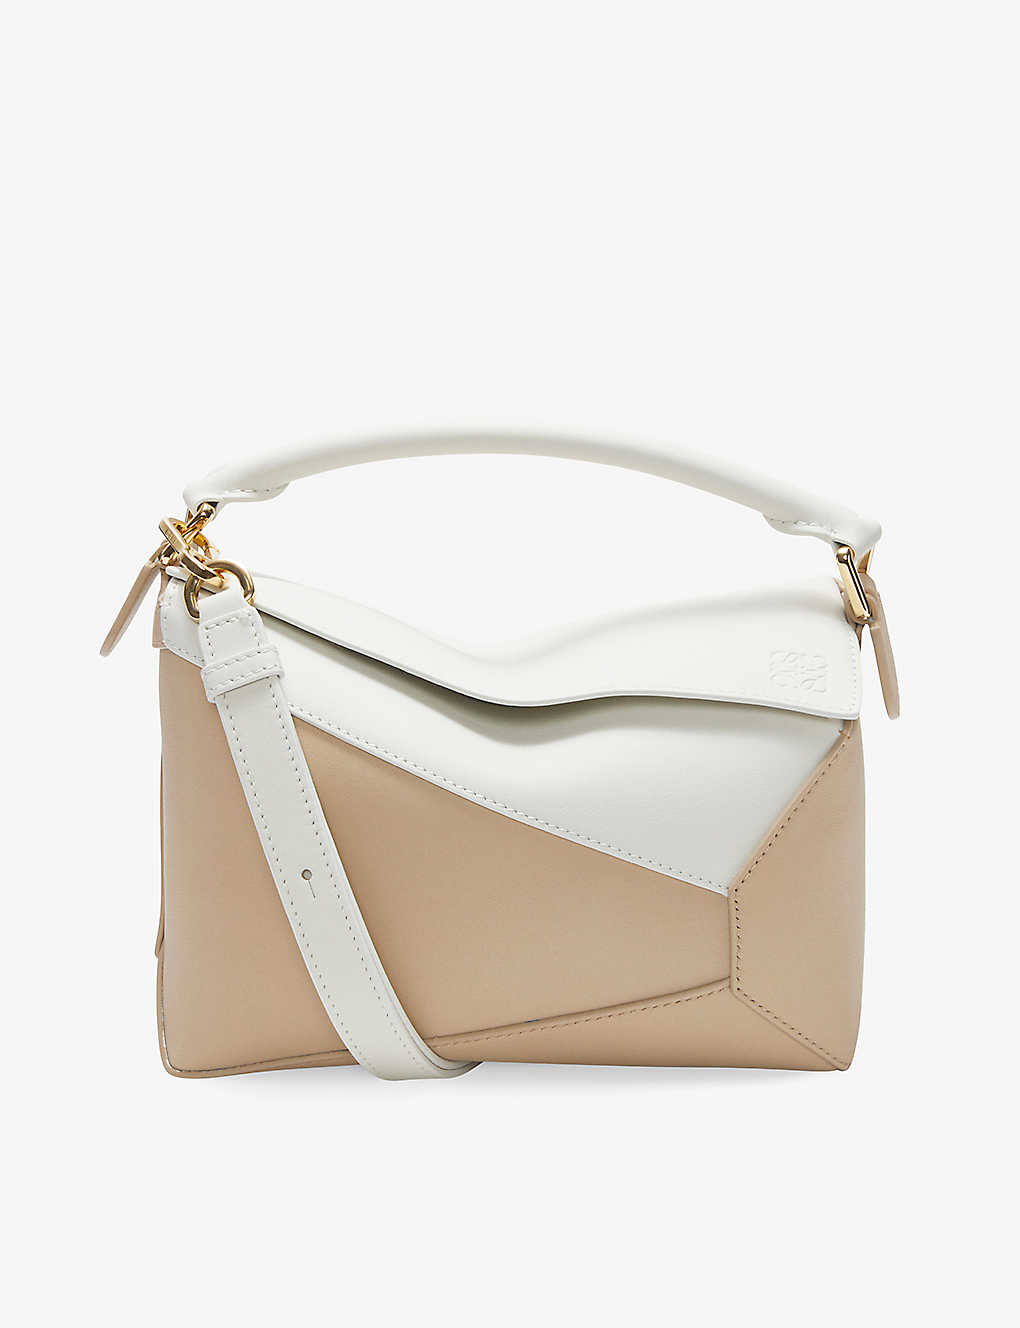 Loewe Puzzle Small Leather Cross-body Bag In White/pap Craft